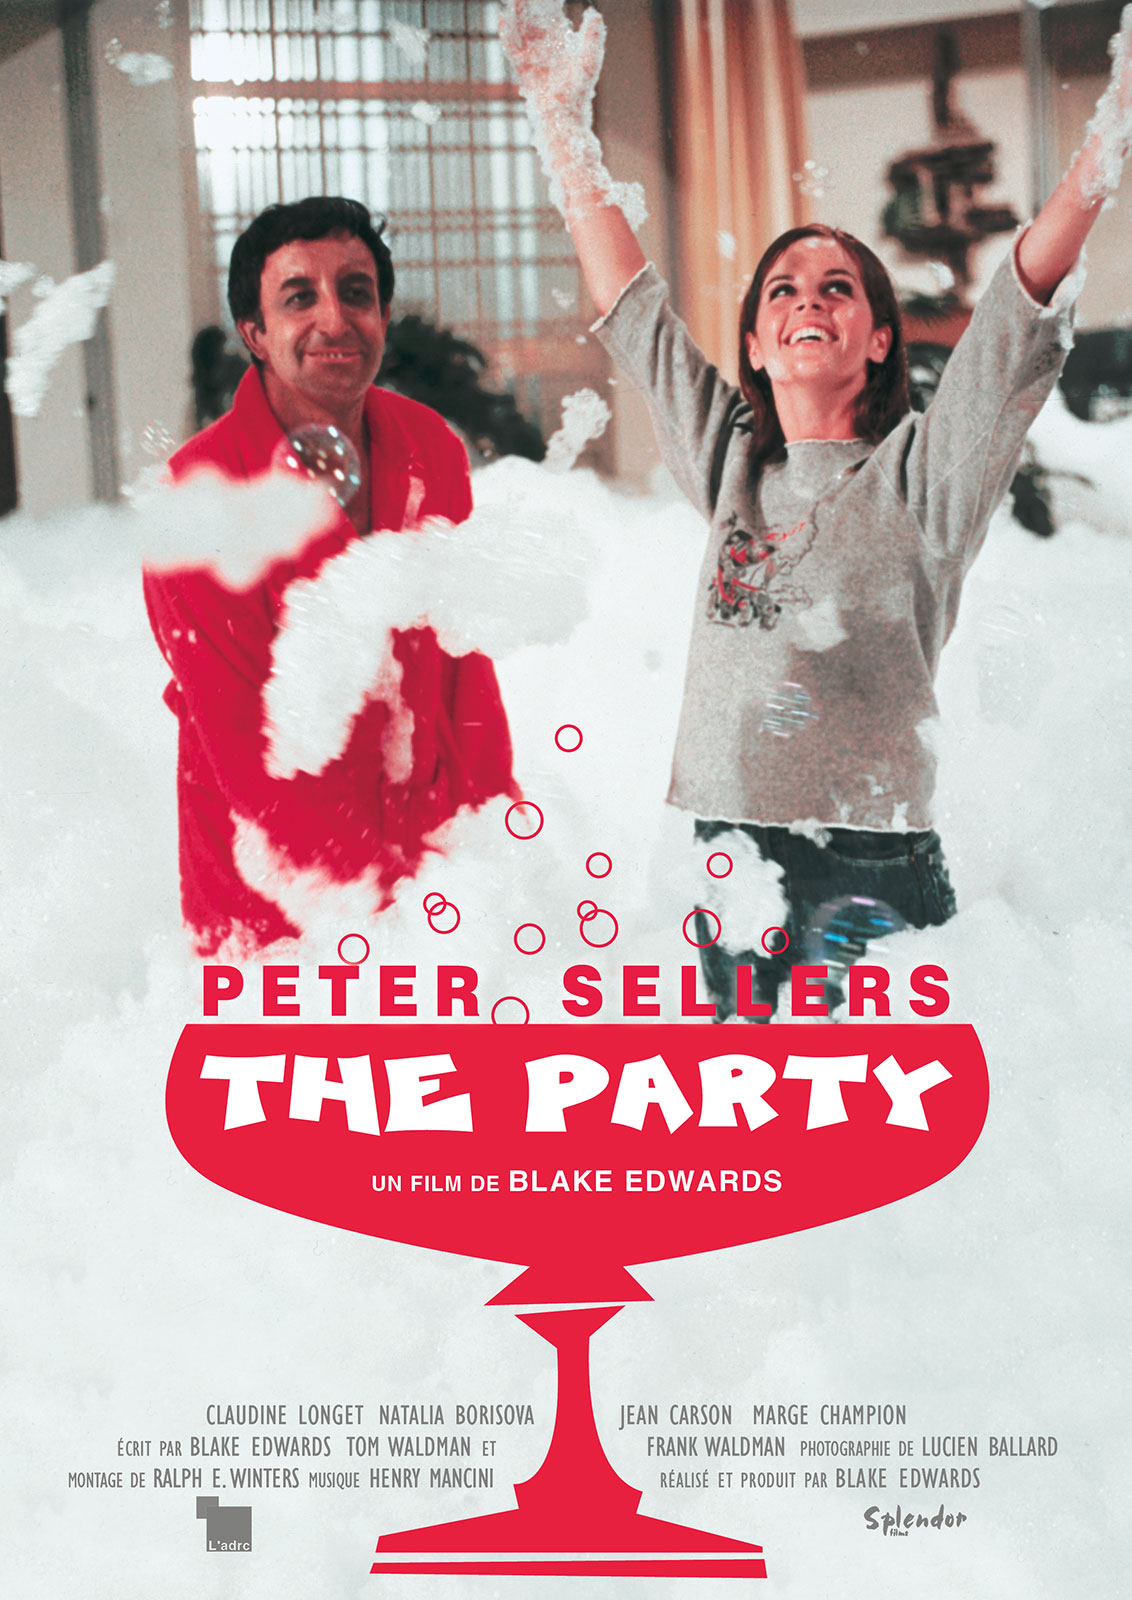 Film Club presents "The Party"